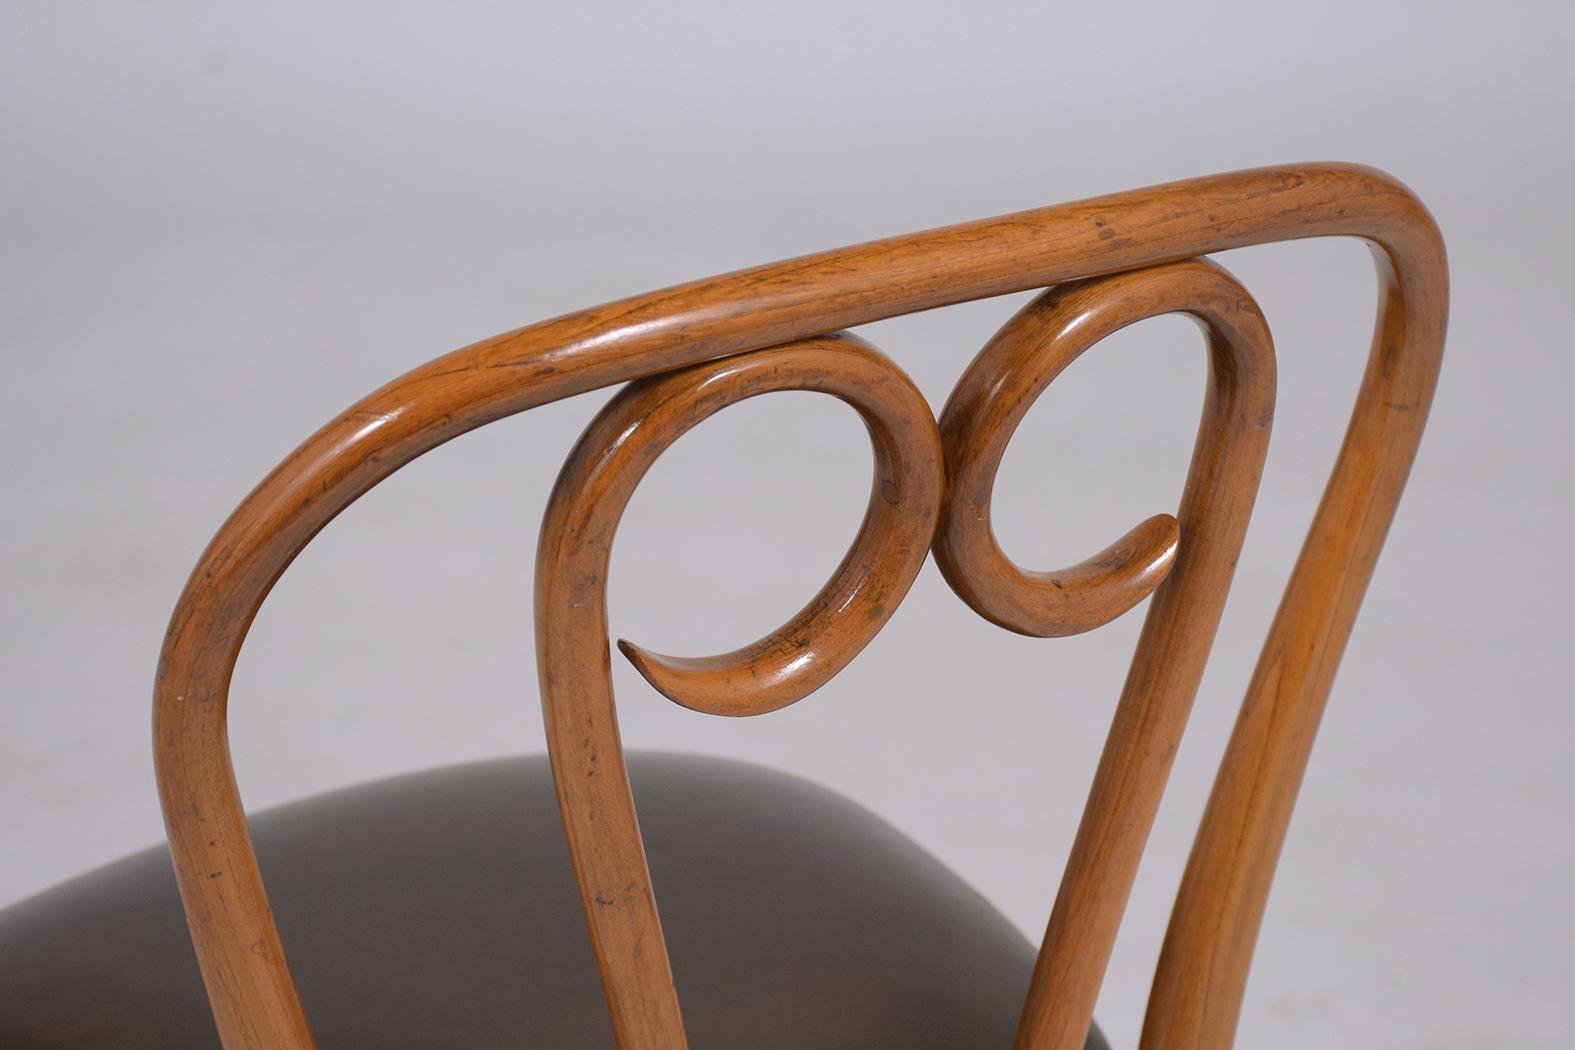 Art-Deco Thonet Bentwood Leather Dining Chairs with Walnut Finish - Set of Six For Sale 7